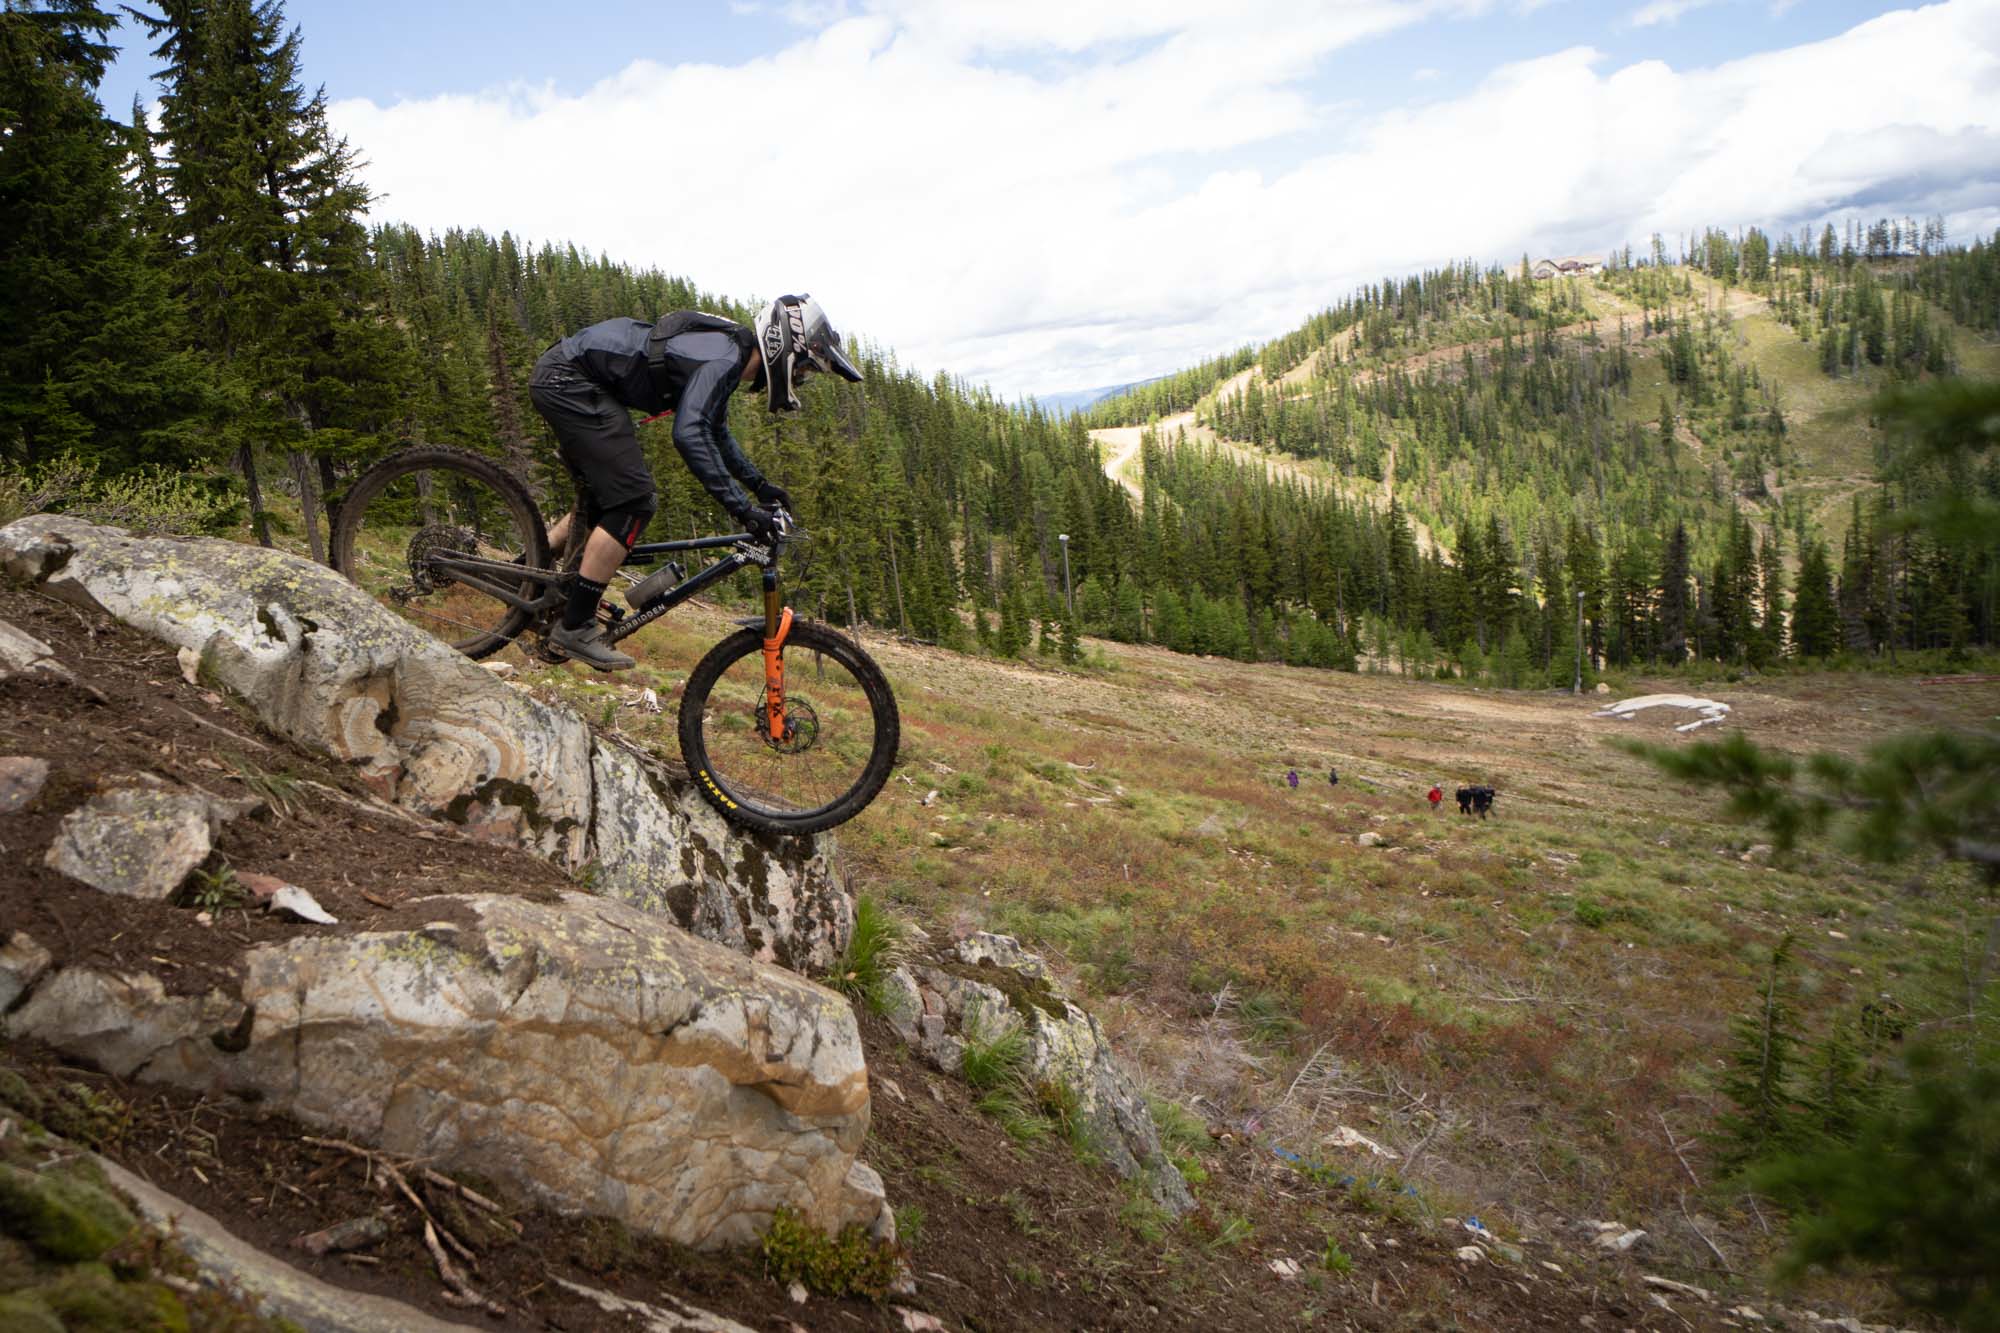 Andrew at the 2021 NAEC race at Silver Mountain in Idaho.